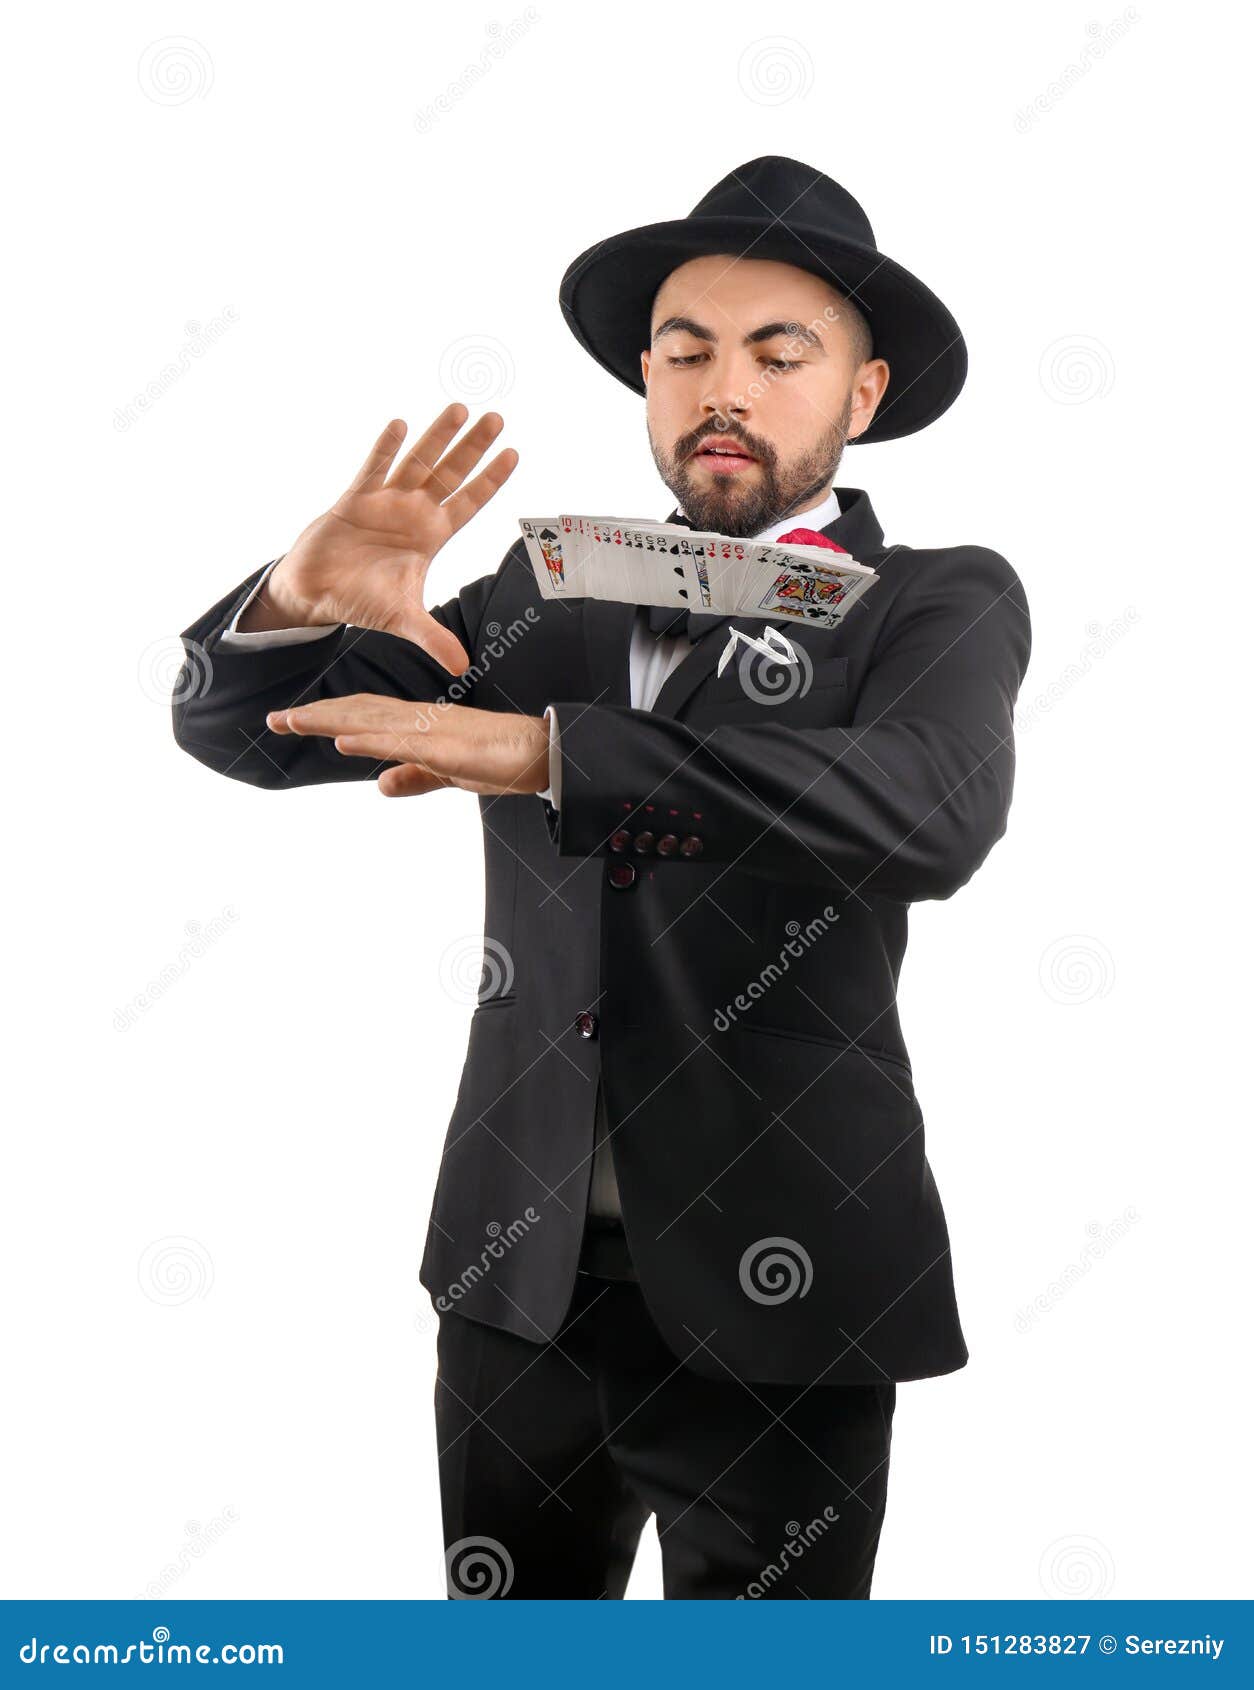 Male Magician Showing Tricks with Cards on White Background Stock Image ...